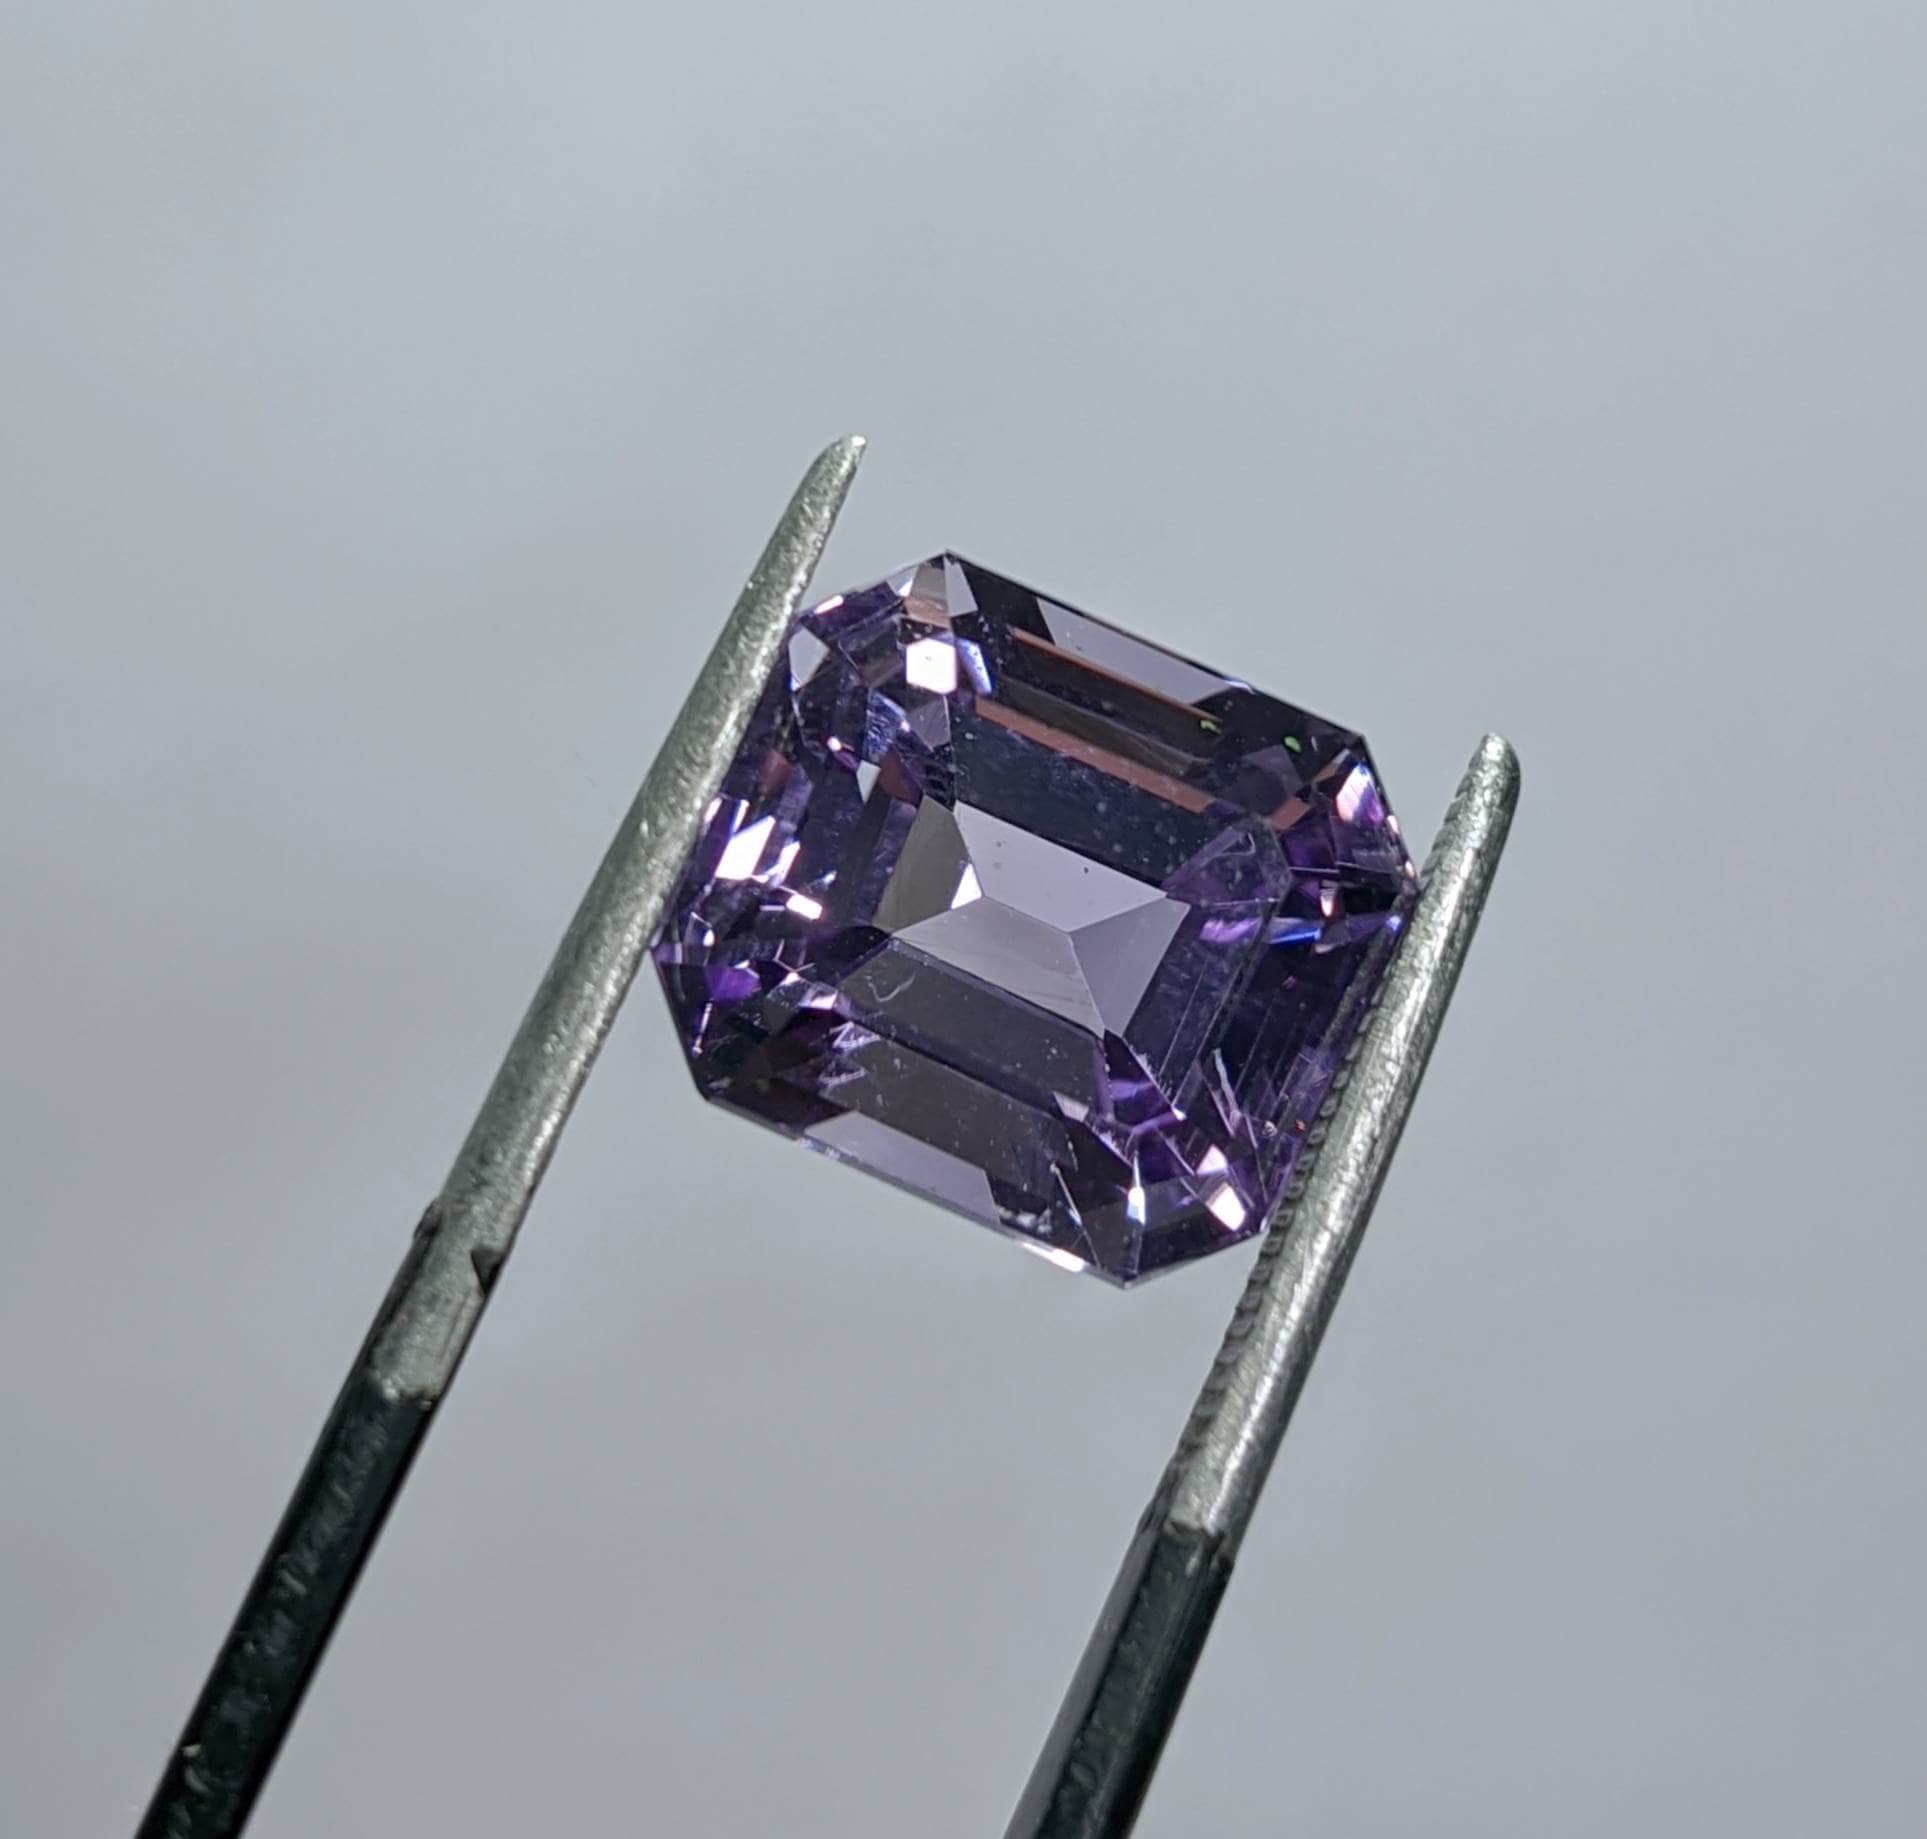 ARSAA GEMS AND MINERALSNatural fine quality beautiful 7 carats light purple color clear faceted amethyst gem - Premium  from ARSAA GEMS AND MINERALS - Just $11.00! Shop now at ARSAA GEMS AND MINERALS